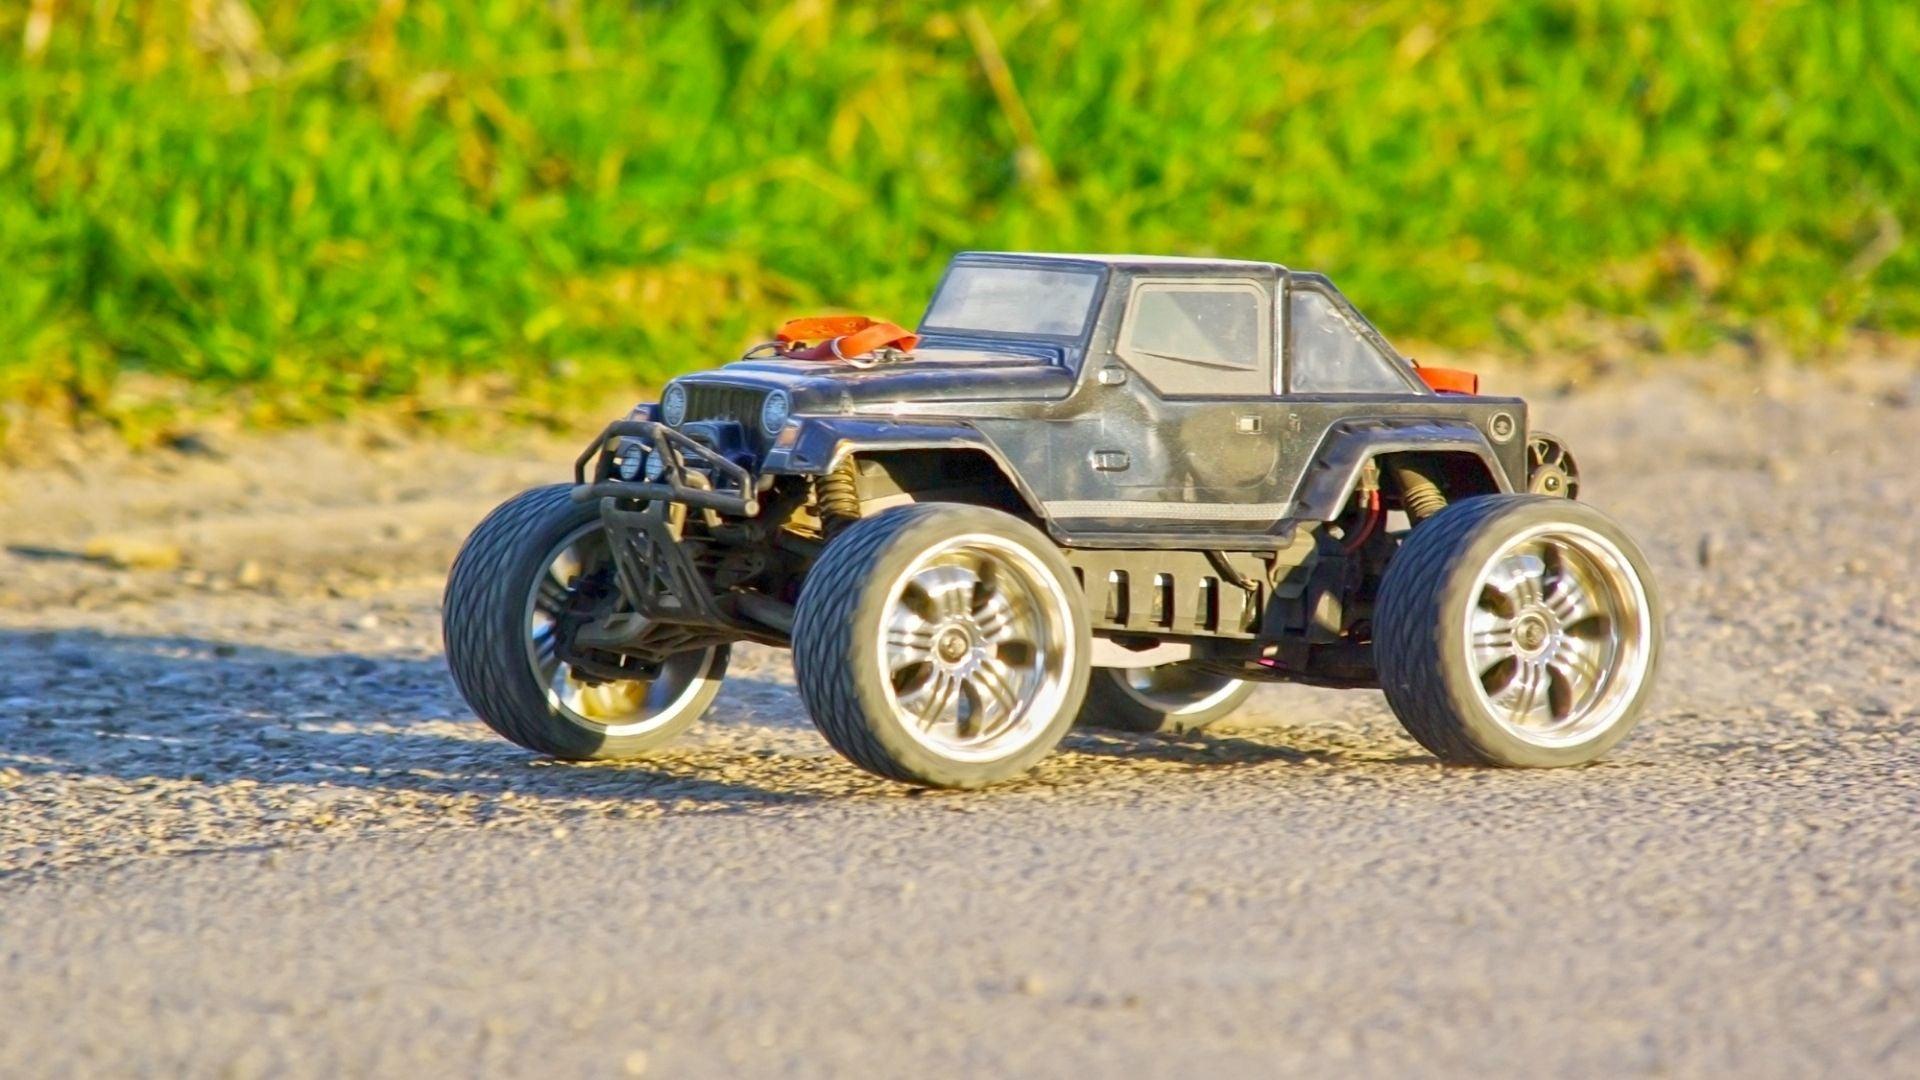 Electric Rc Trucks For Adults: Factors to Consider When Choosing an Electric RC Truck for Adults